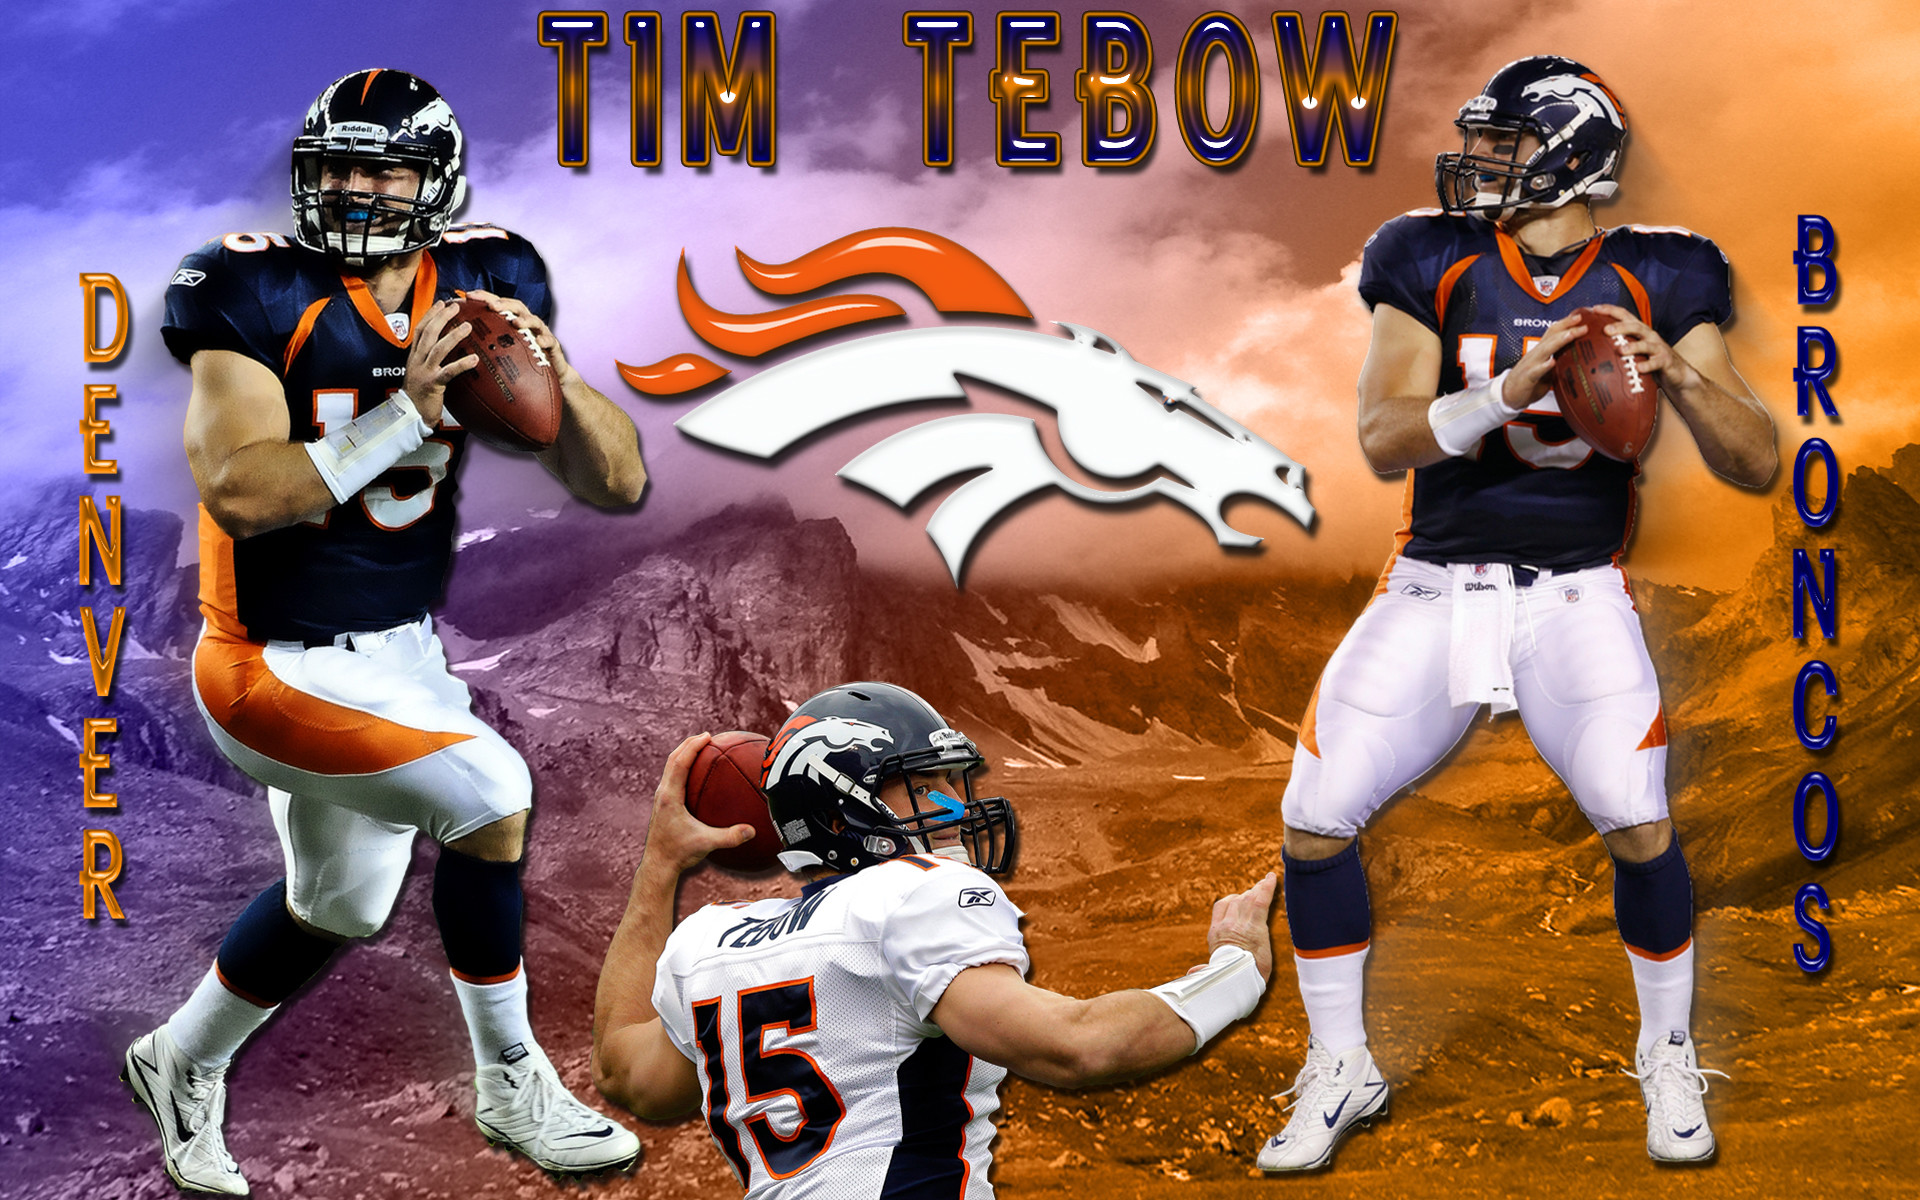 1920x1200 Wallpapers By Wicked Shadows: Tim Tebow Denver Broncos Wallpaper